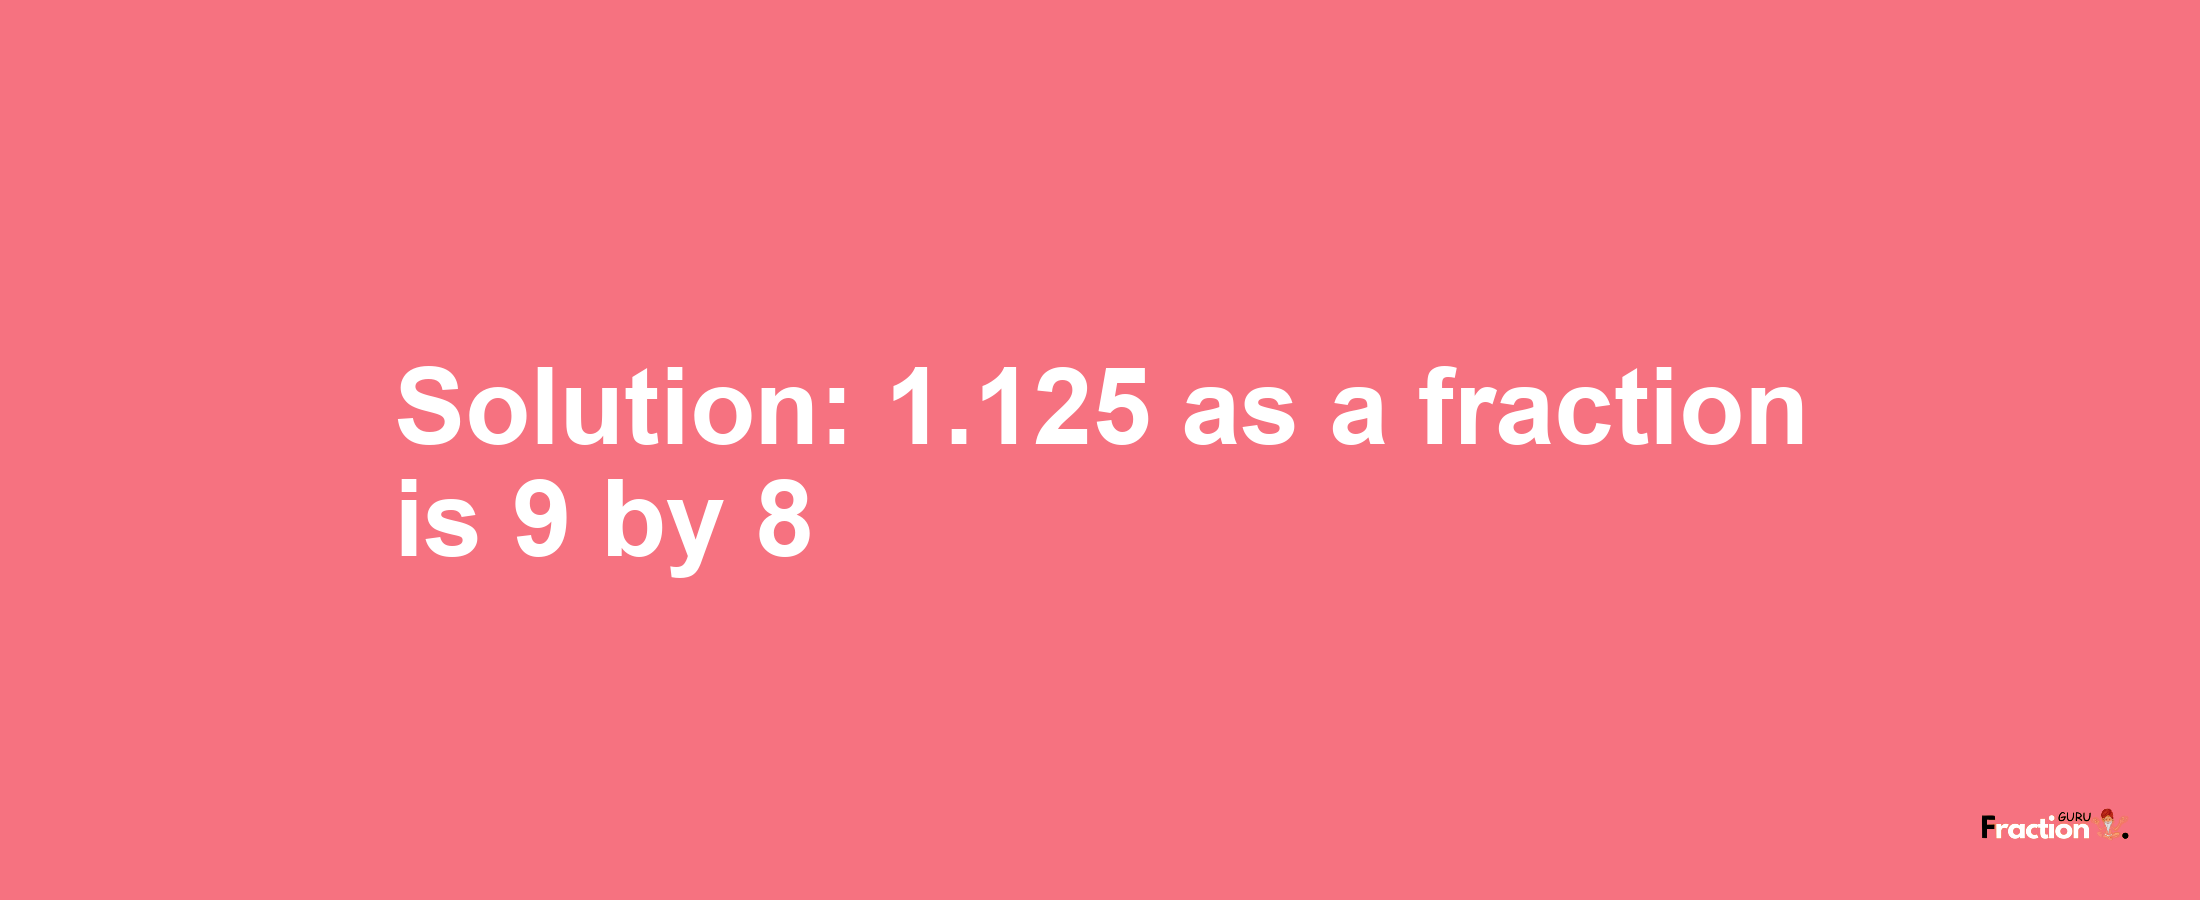 Solution:1.125 as a fraction is 9/8